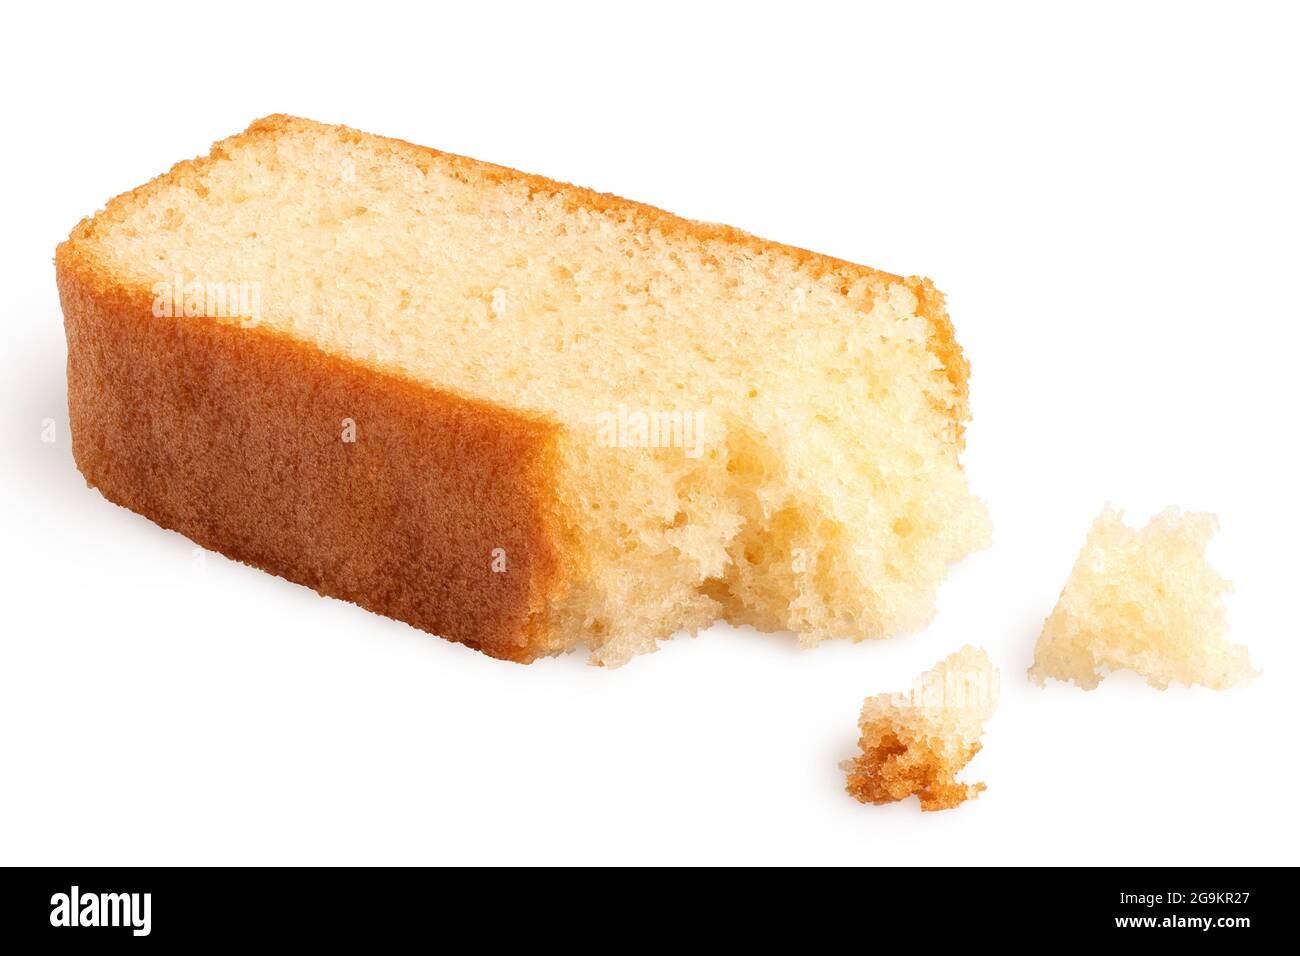 Partially eaten slice of plain sponge cake lying flat isolated on white. With crumbs. Stock Photo